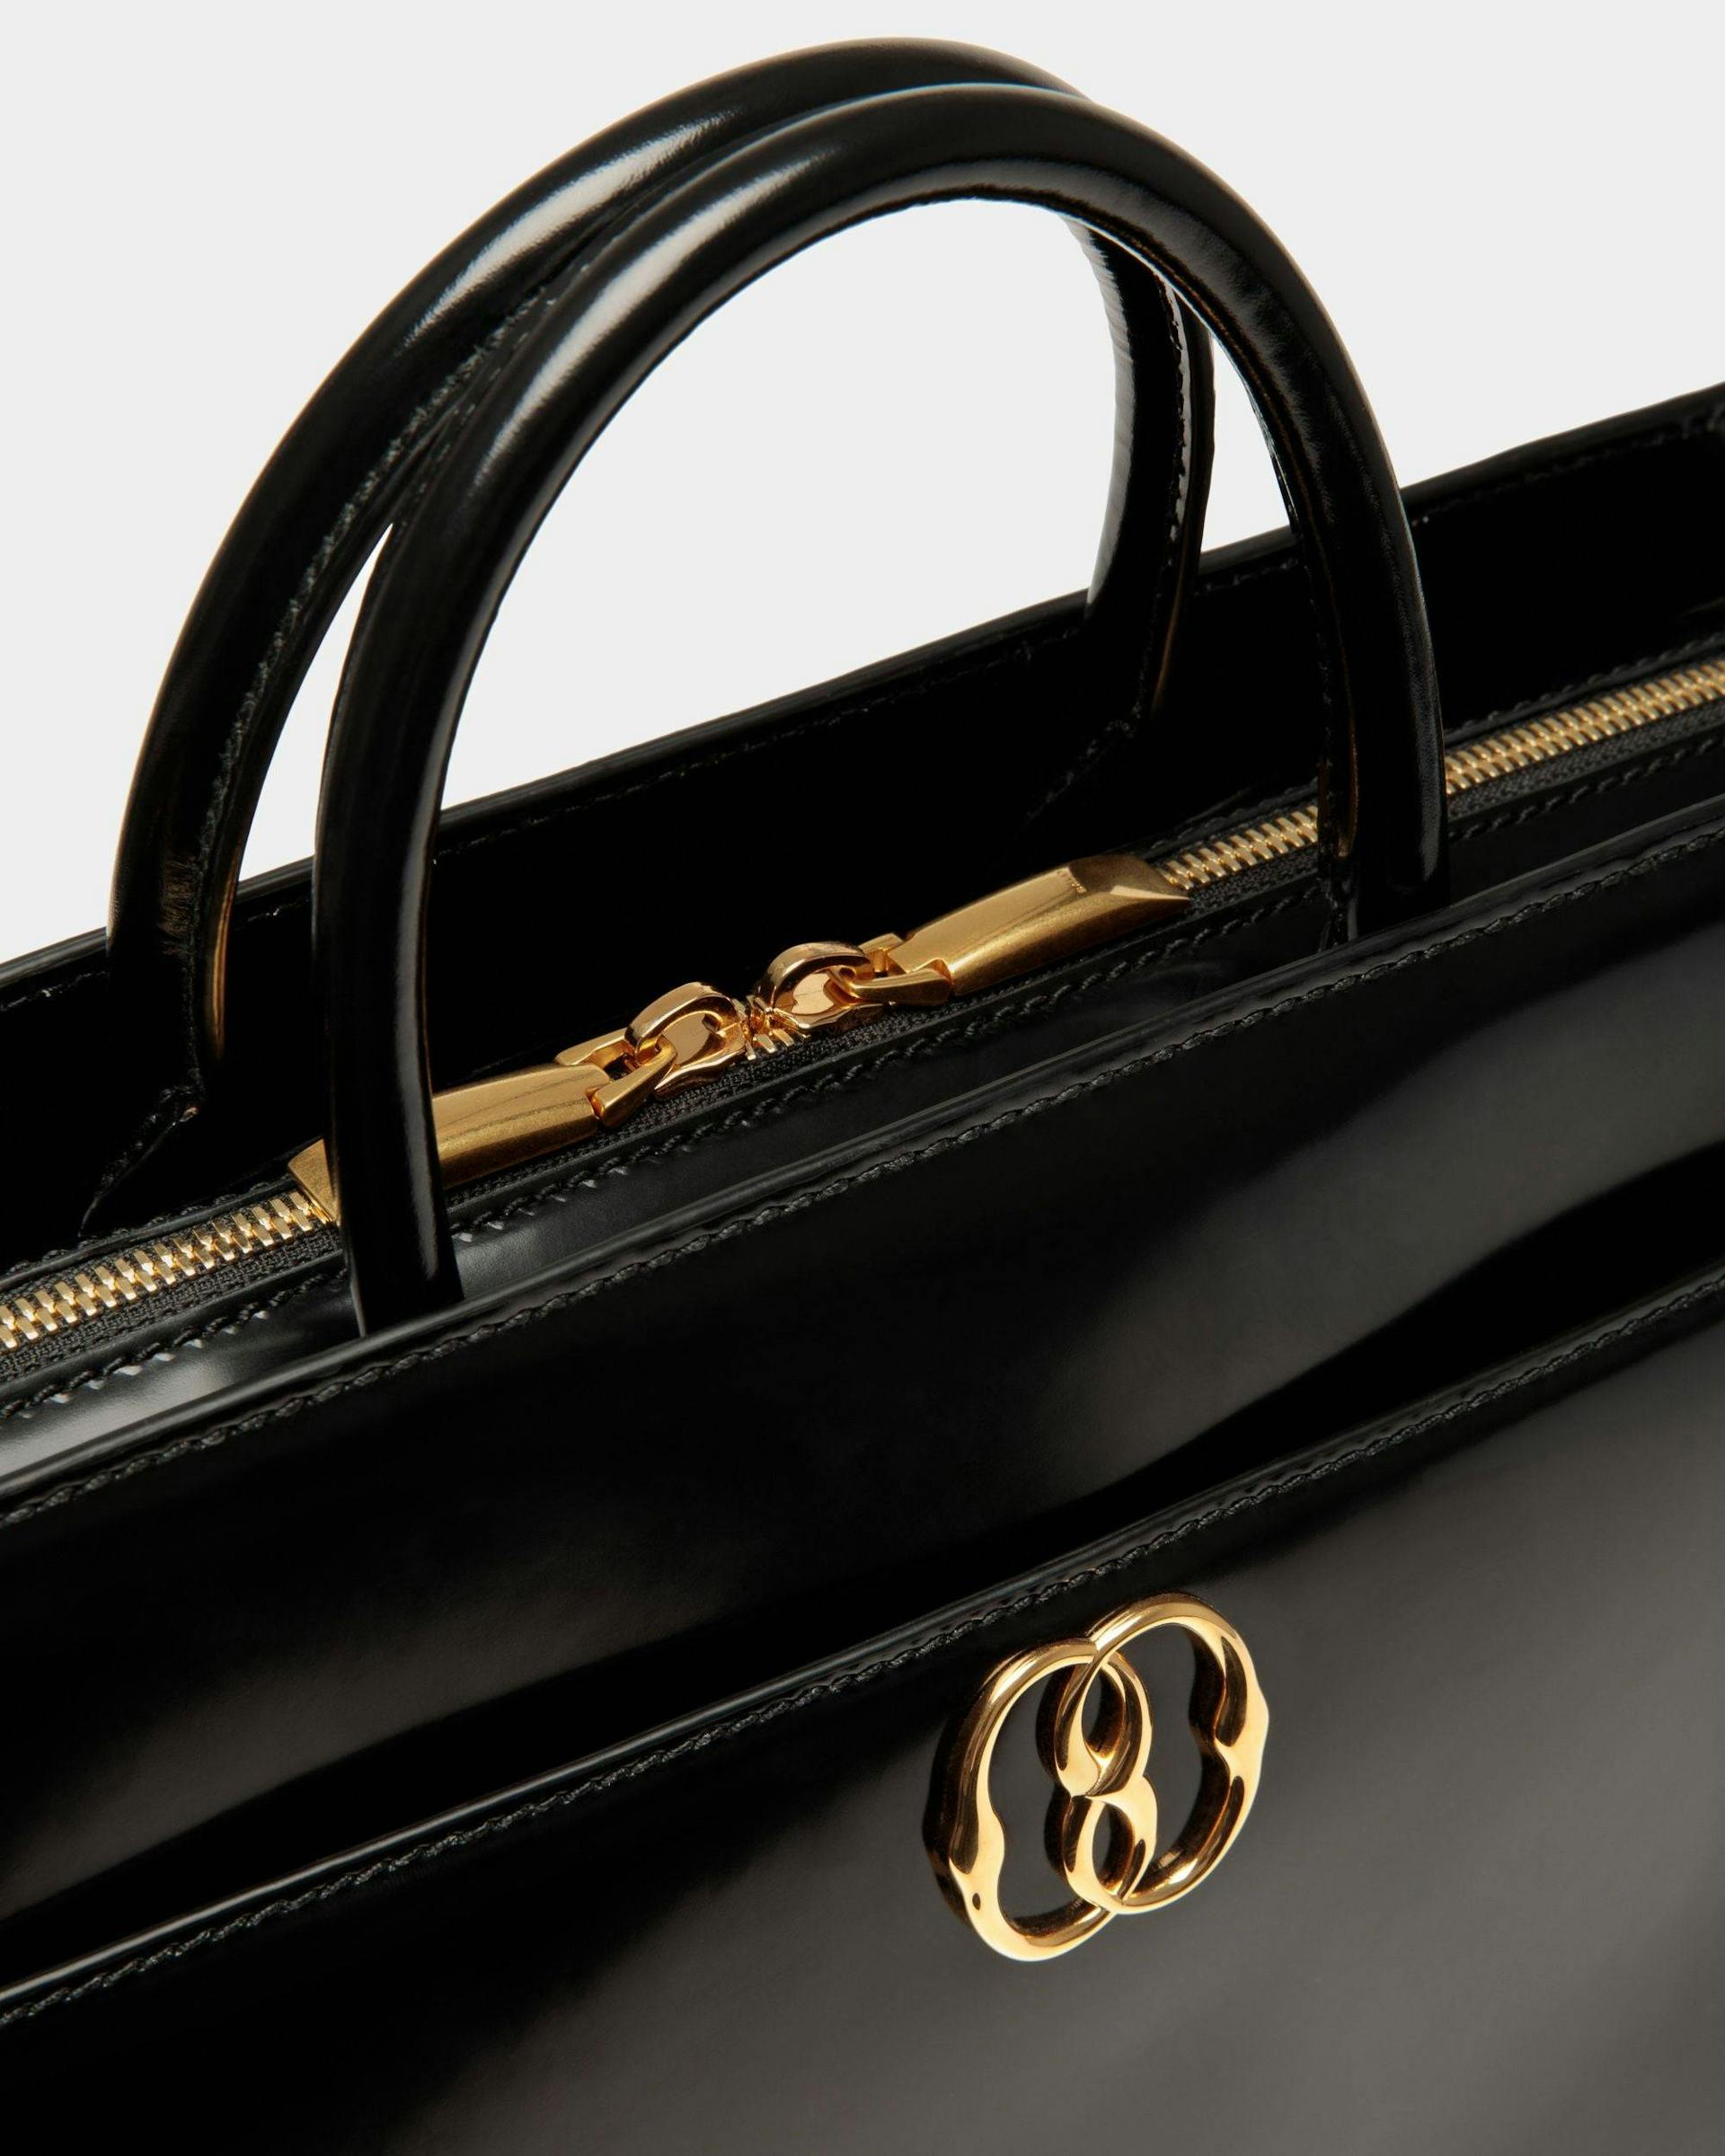 Women's Emblem Tote Bag In Black Patent Leather | Bally | Still Life Detail